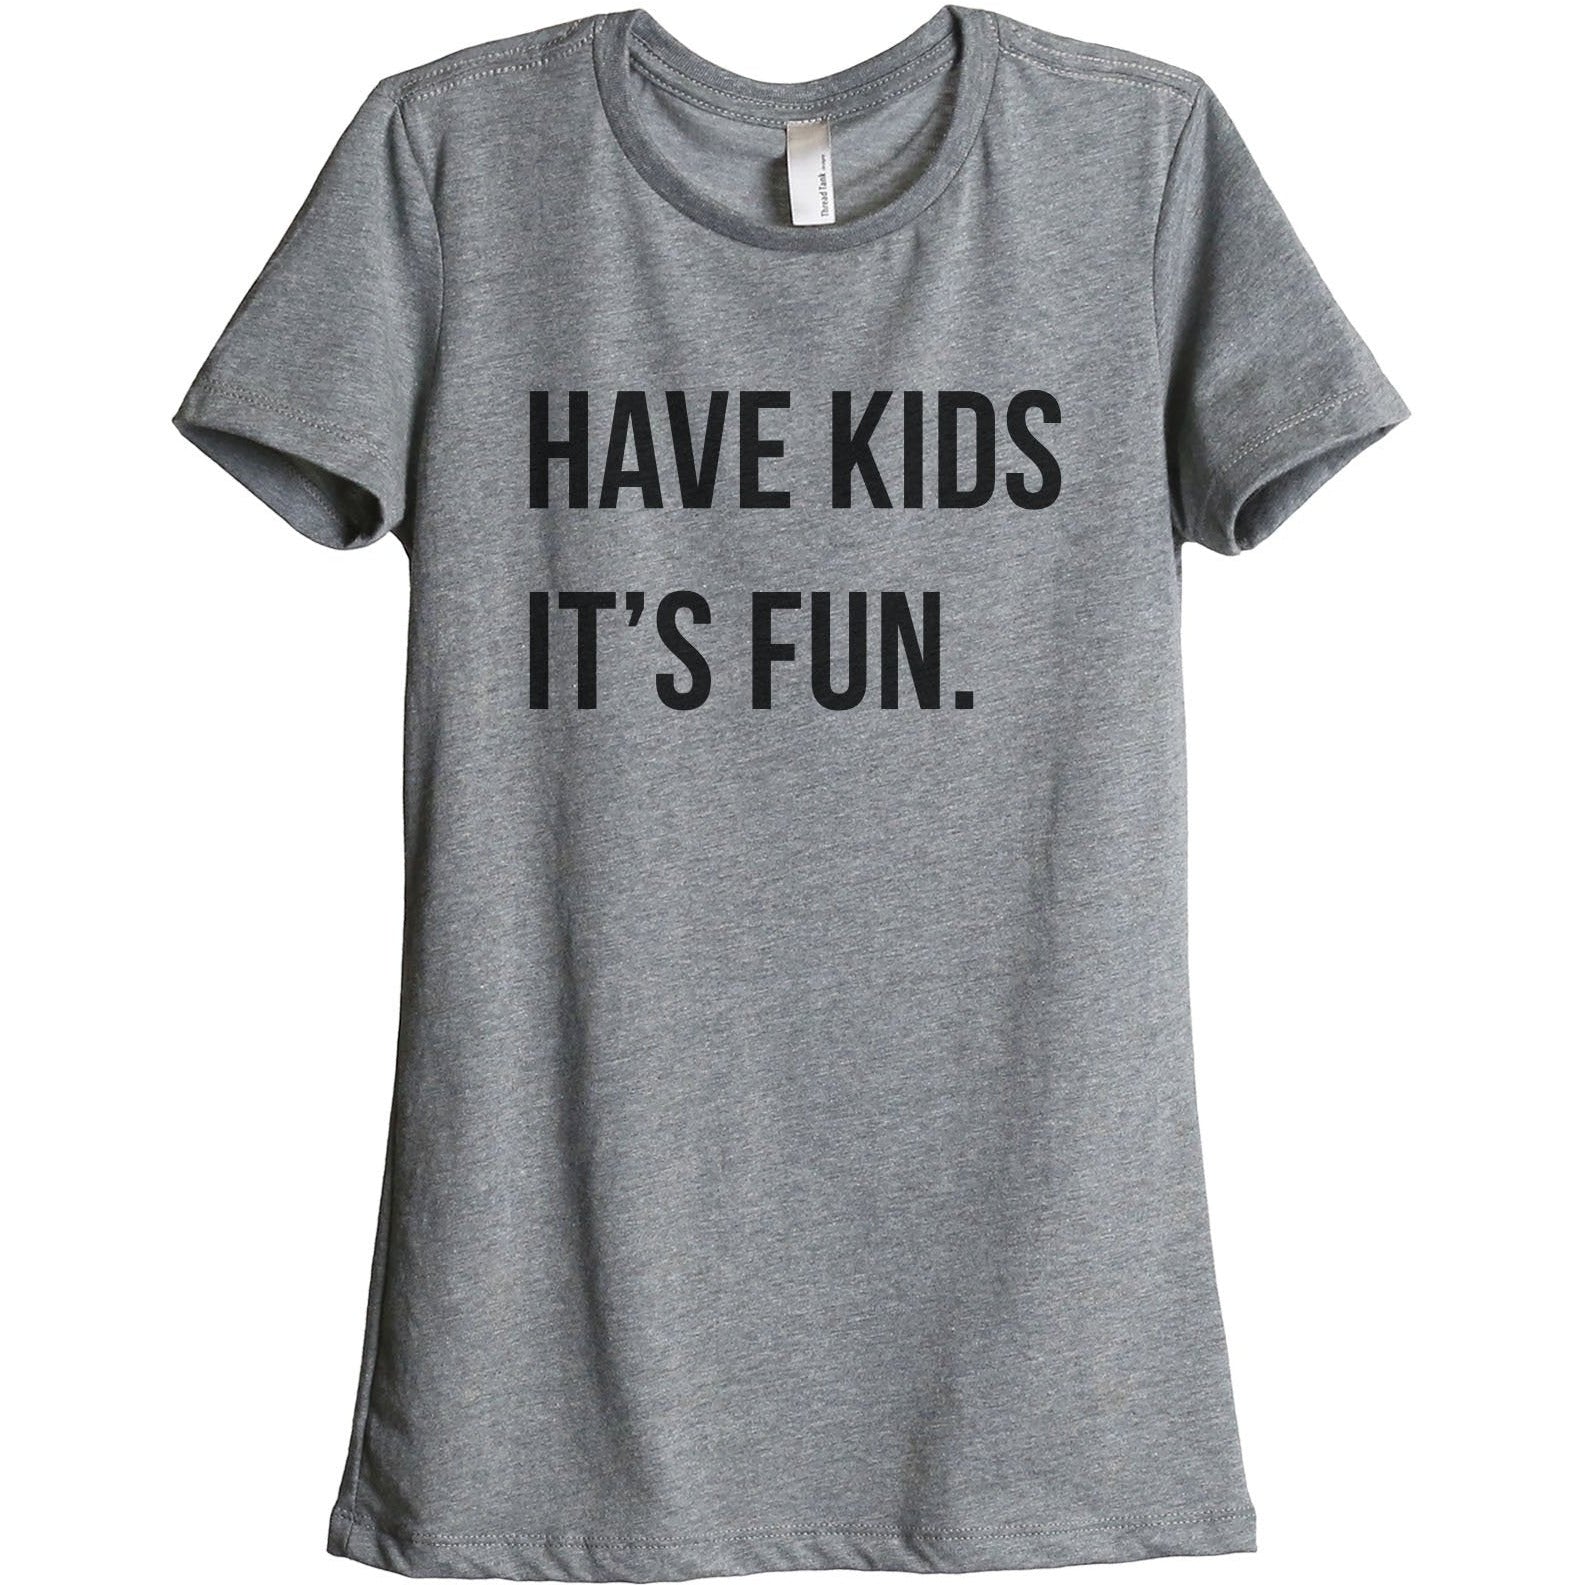 Have Kids It's Fun Women's Relaxed Crewneck T-Shirt Top Tee Heather Grey